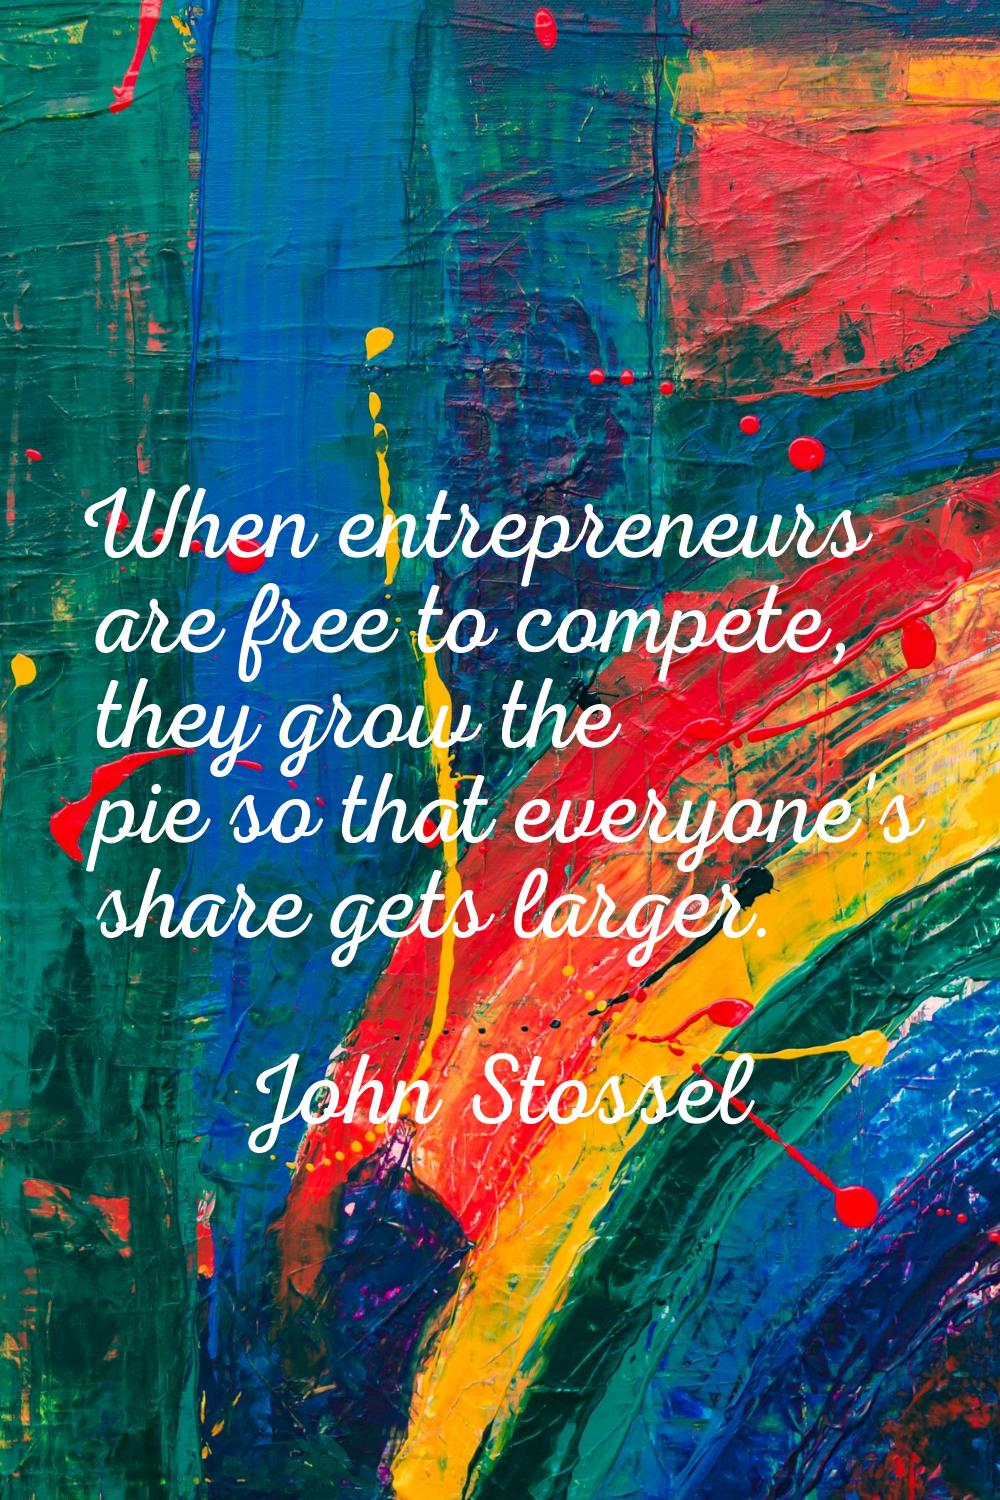 When entrepreneurs are free to compete, they grow the pie so that everyone's share gets larger.